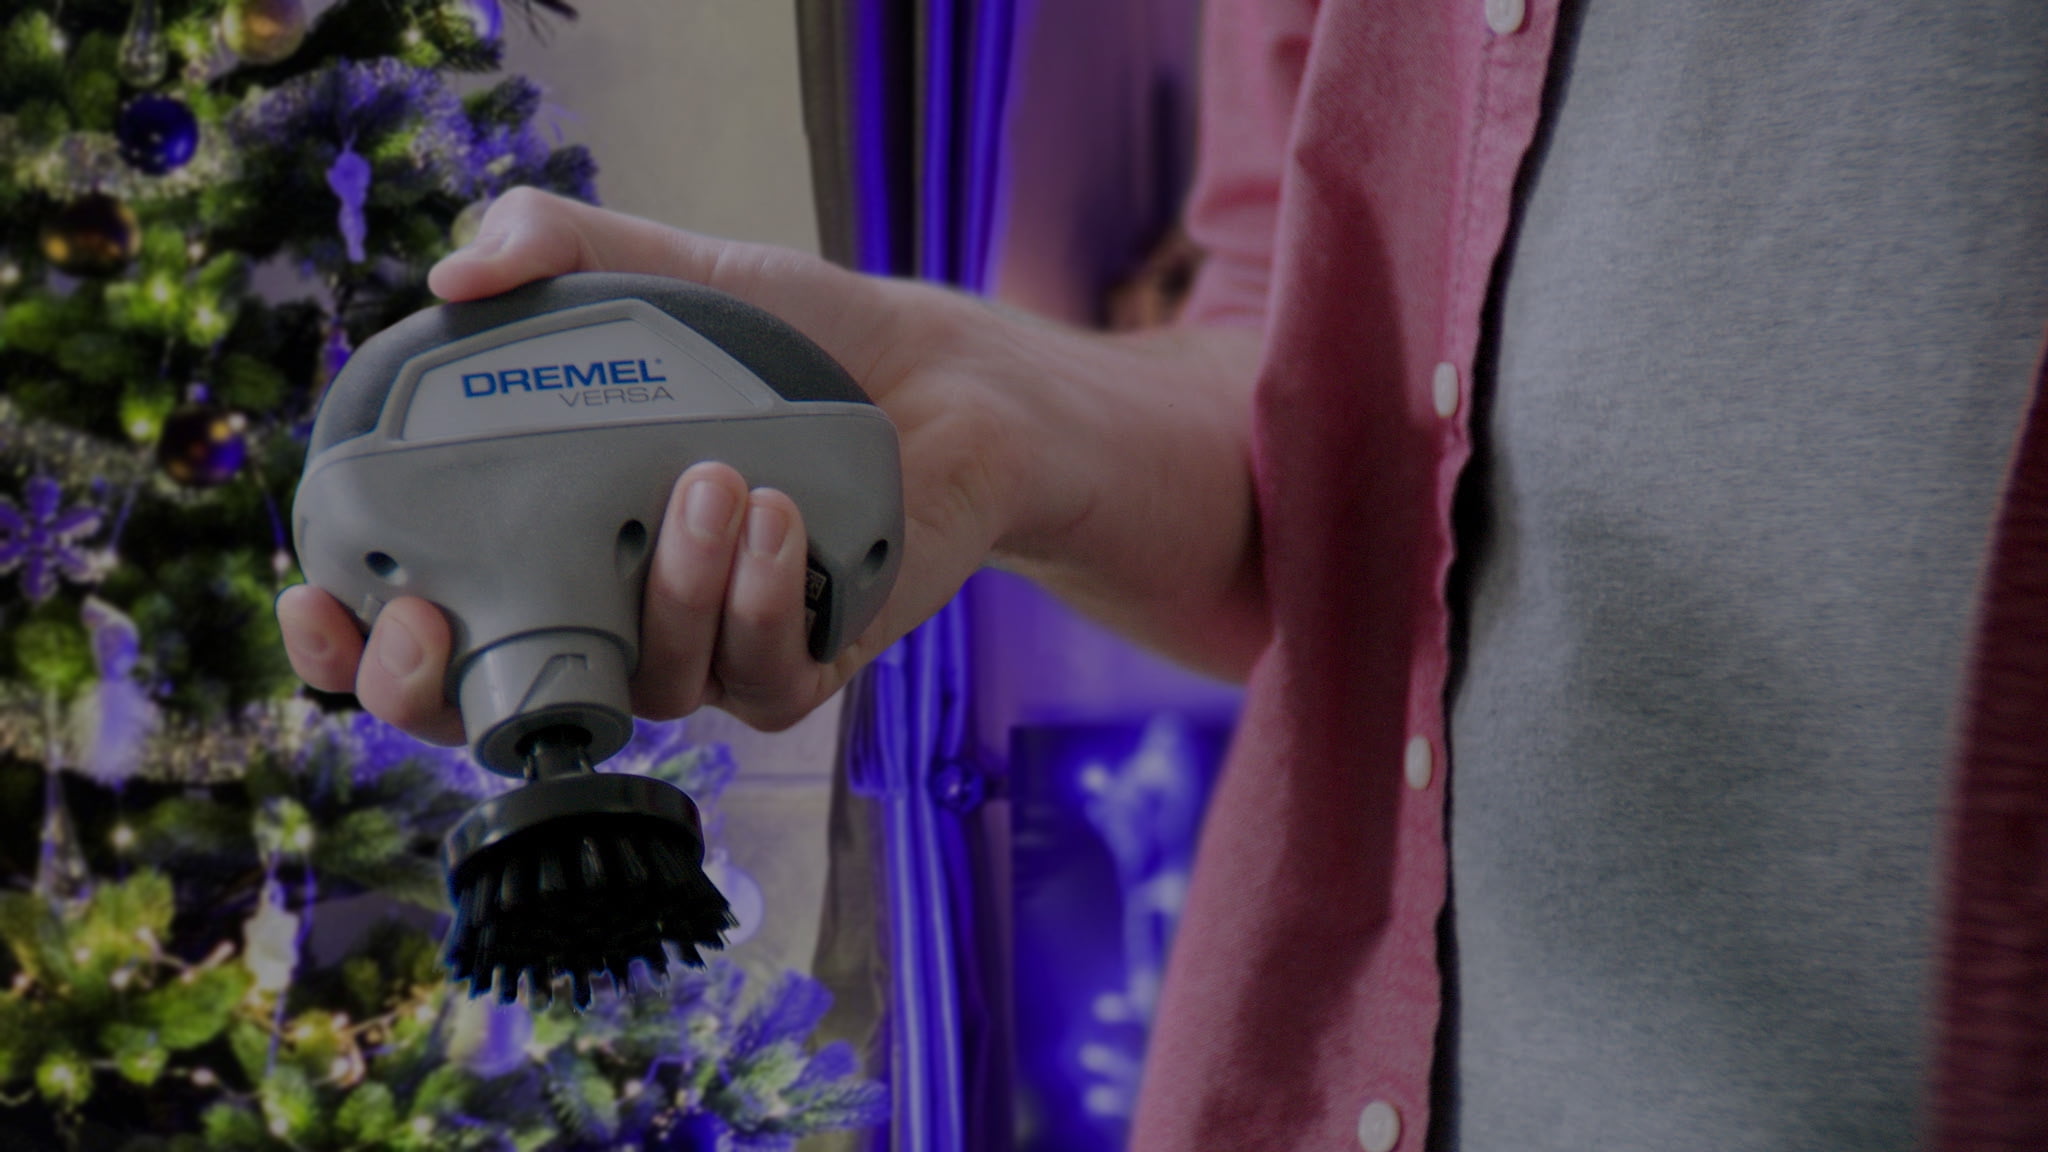 Dremel Versa Power Tile, Stoves, Bathrooms, Tubs, Kit Auto, Pans, Sinks, Tool for Cleaning & Grills